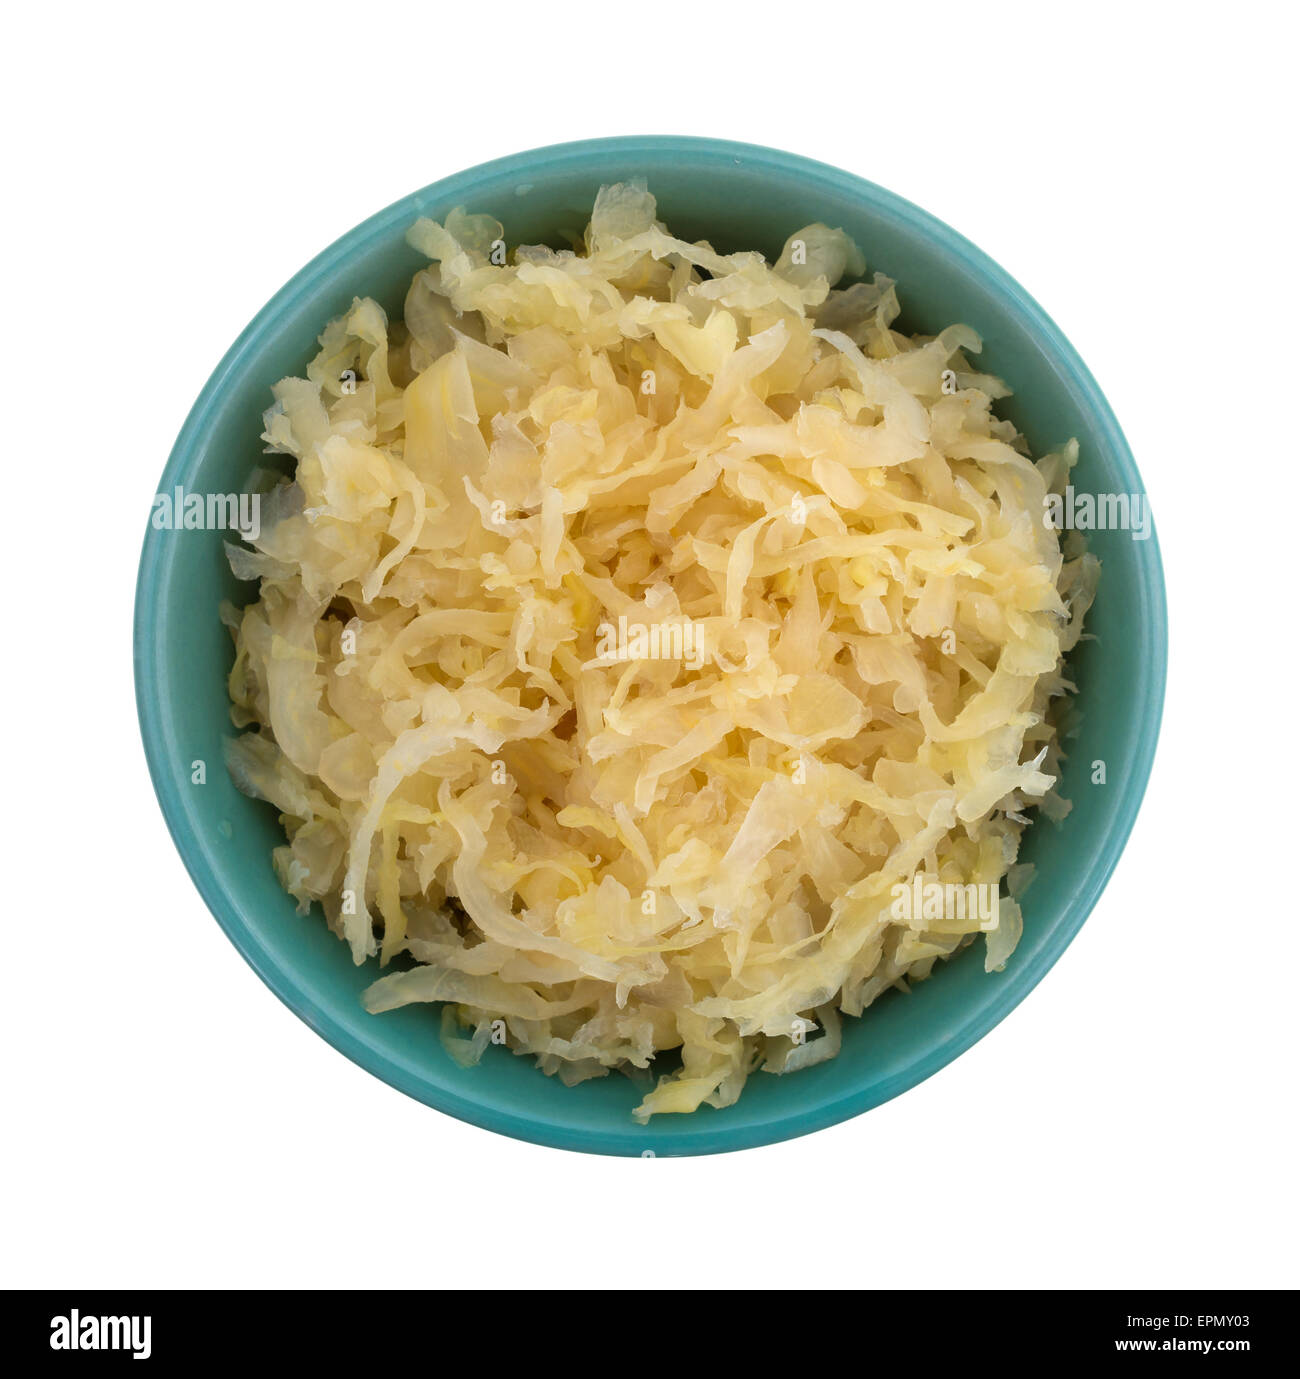 Top view of a small bowl filled with canned sauerkraut isolated on a white background. Stock Photo